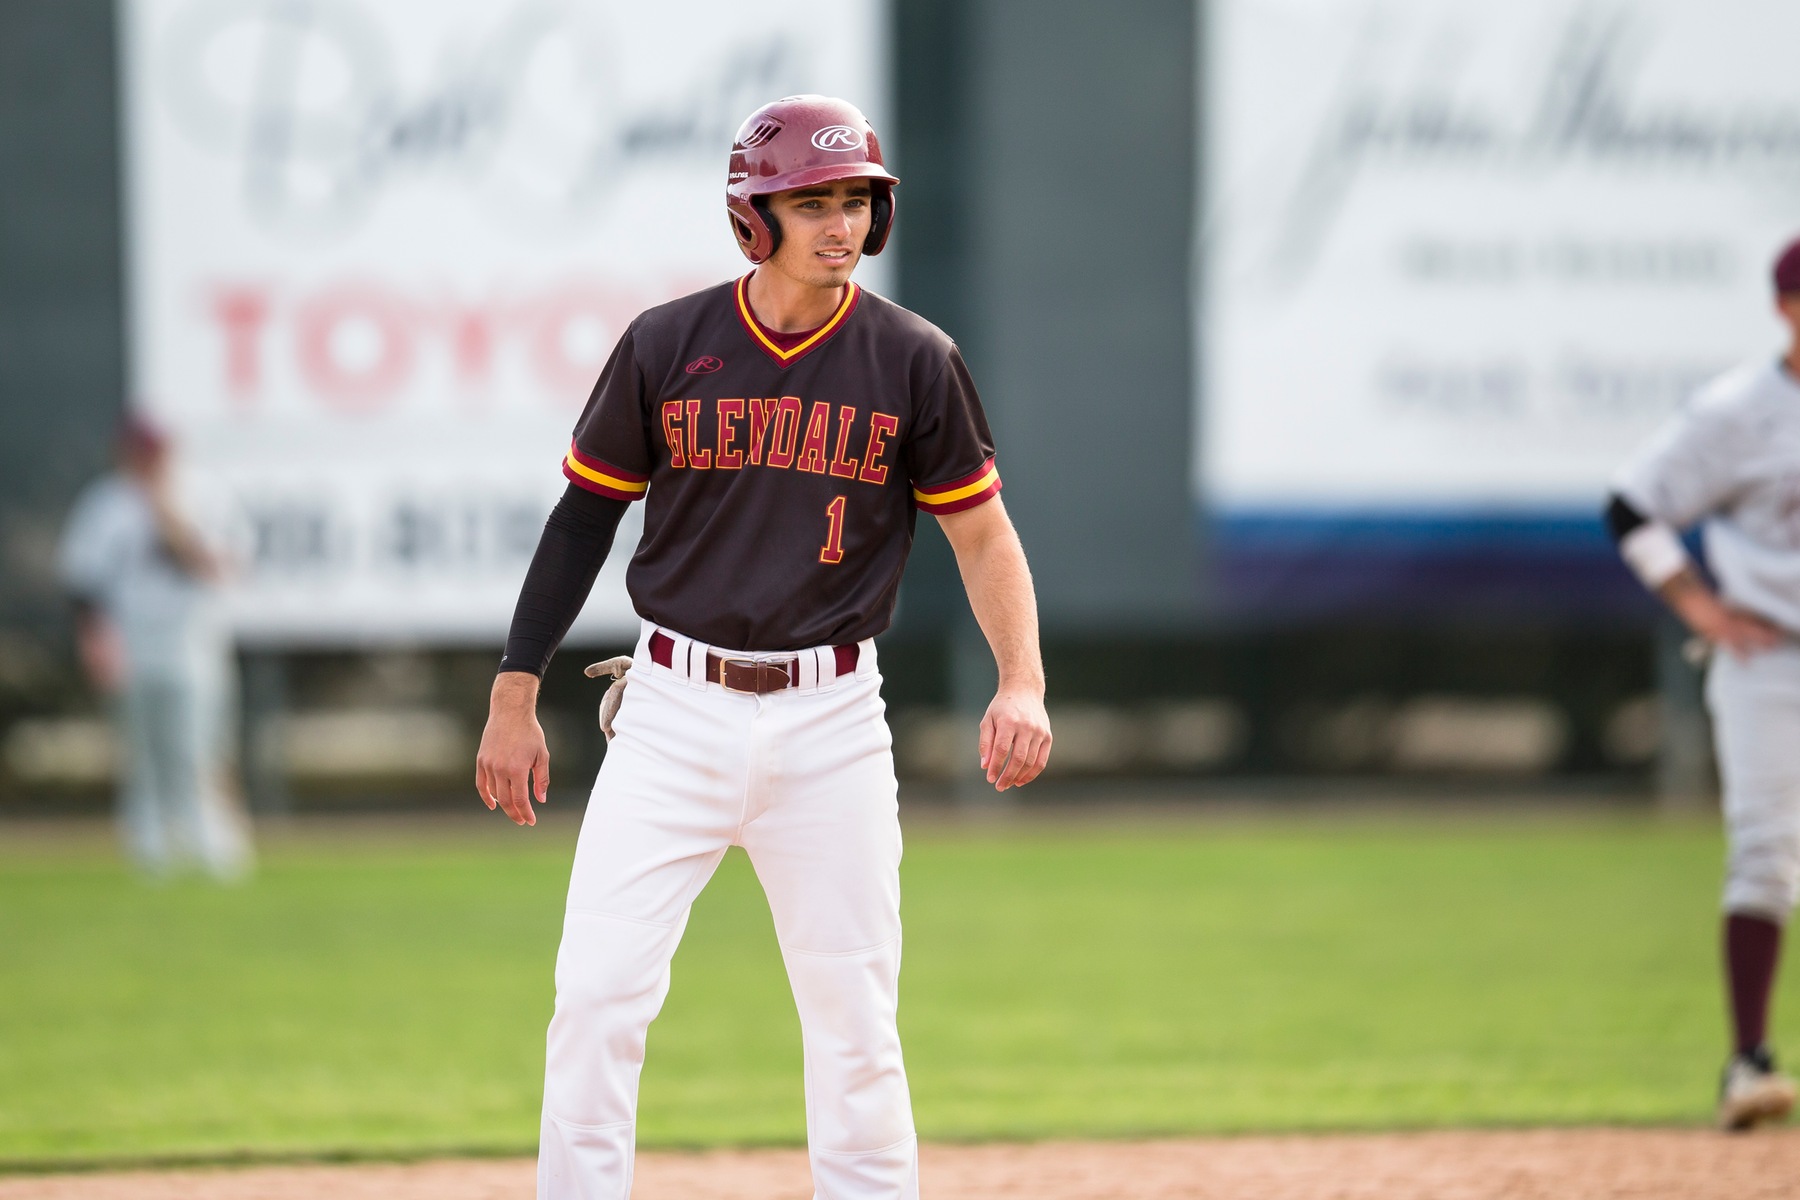 Glendale blasts Canyons 24-3; Maintains two game lead in WSC East